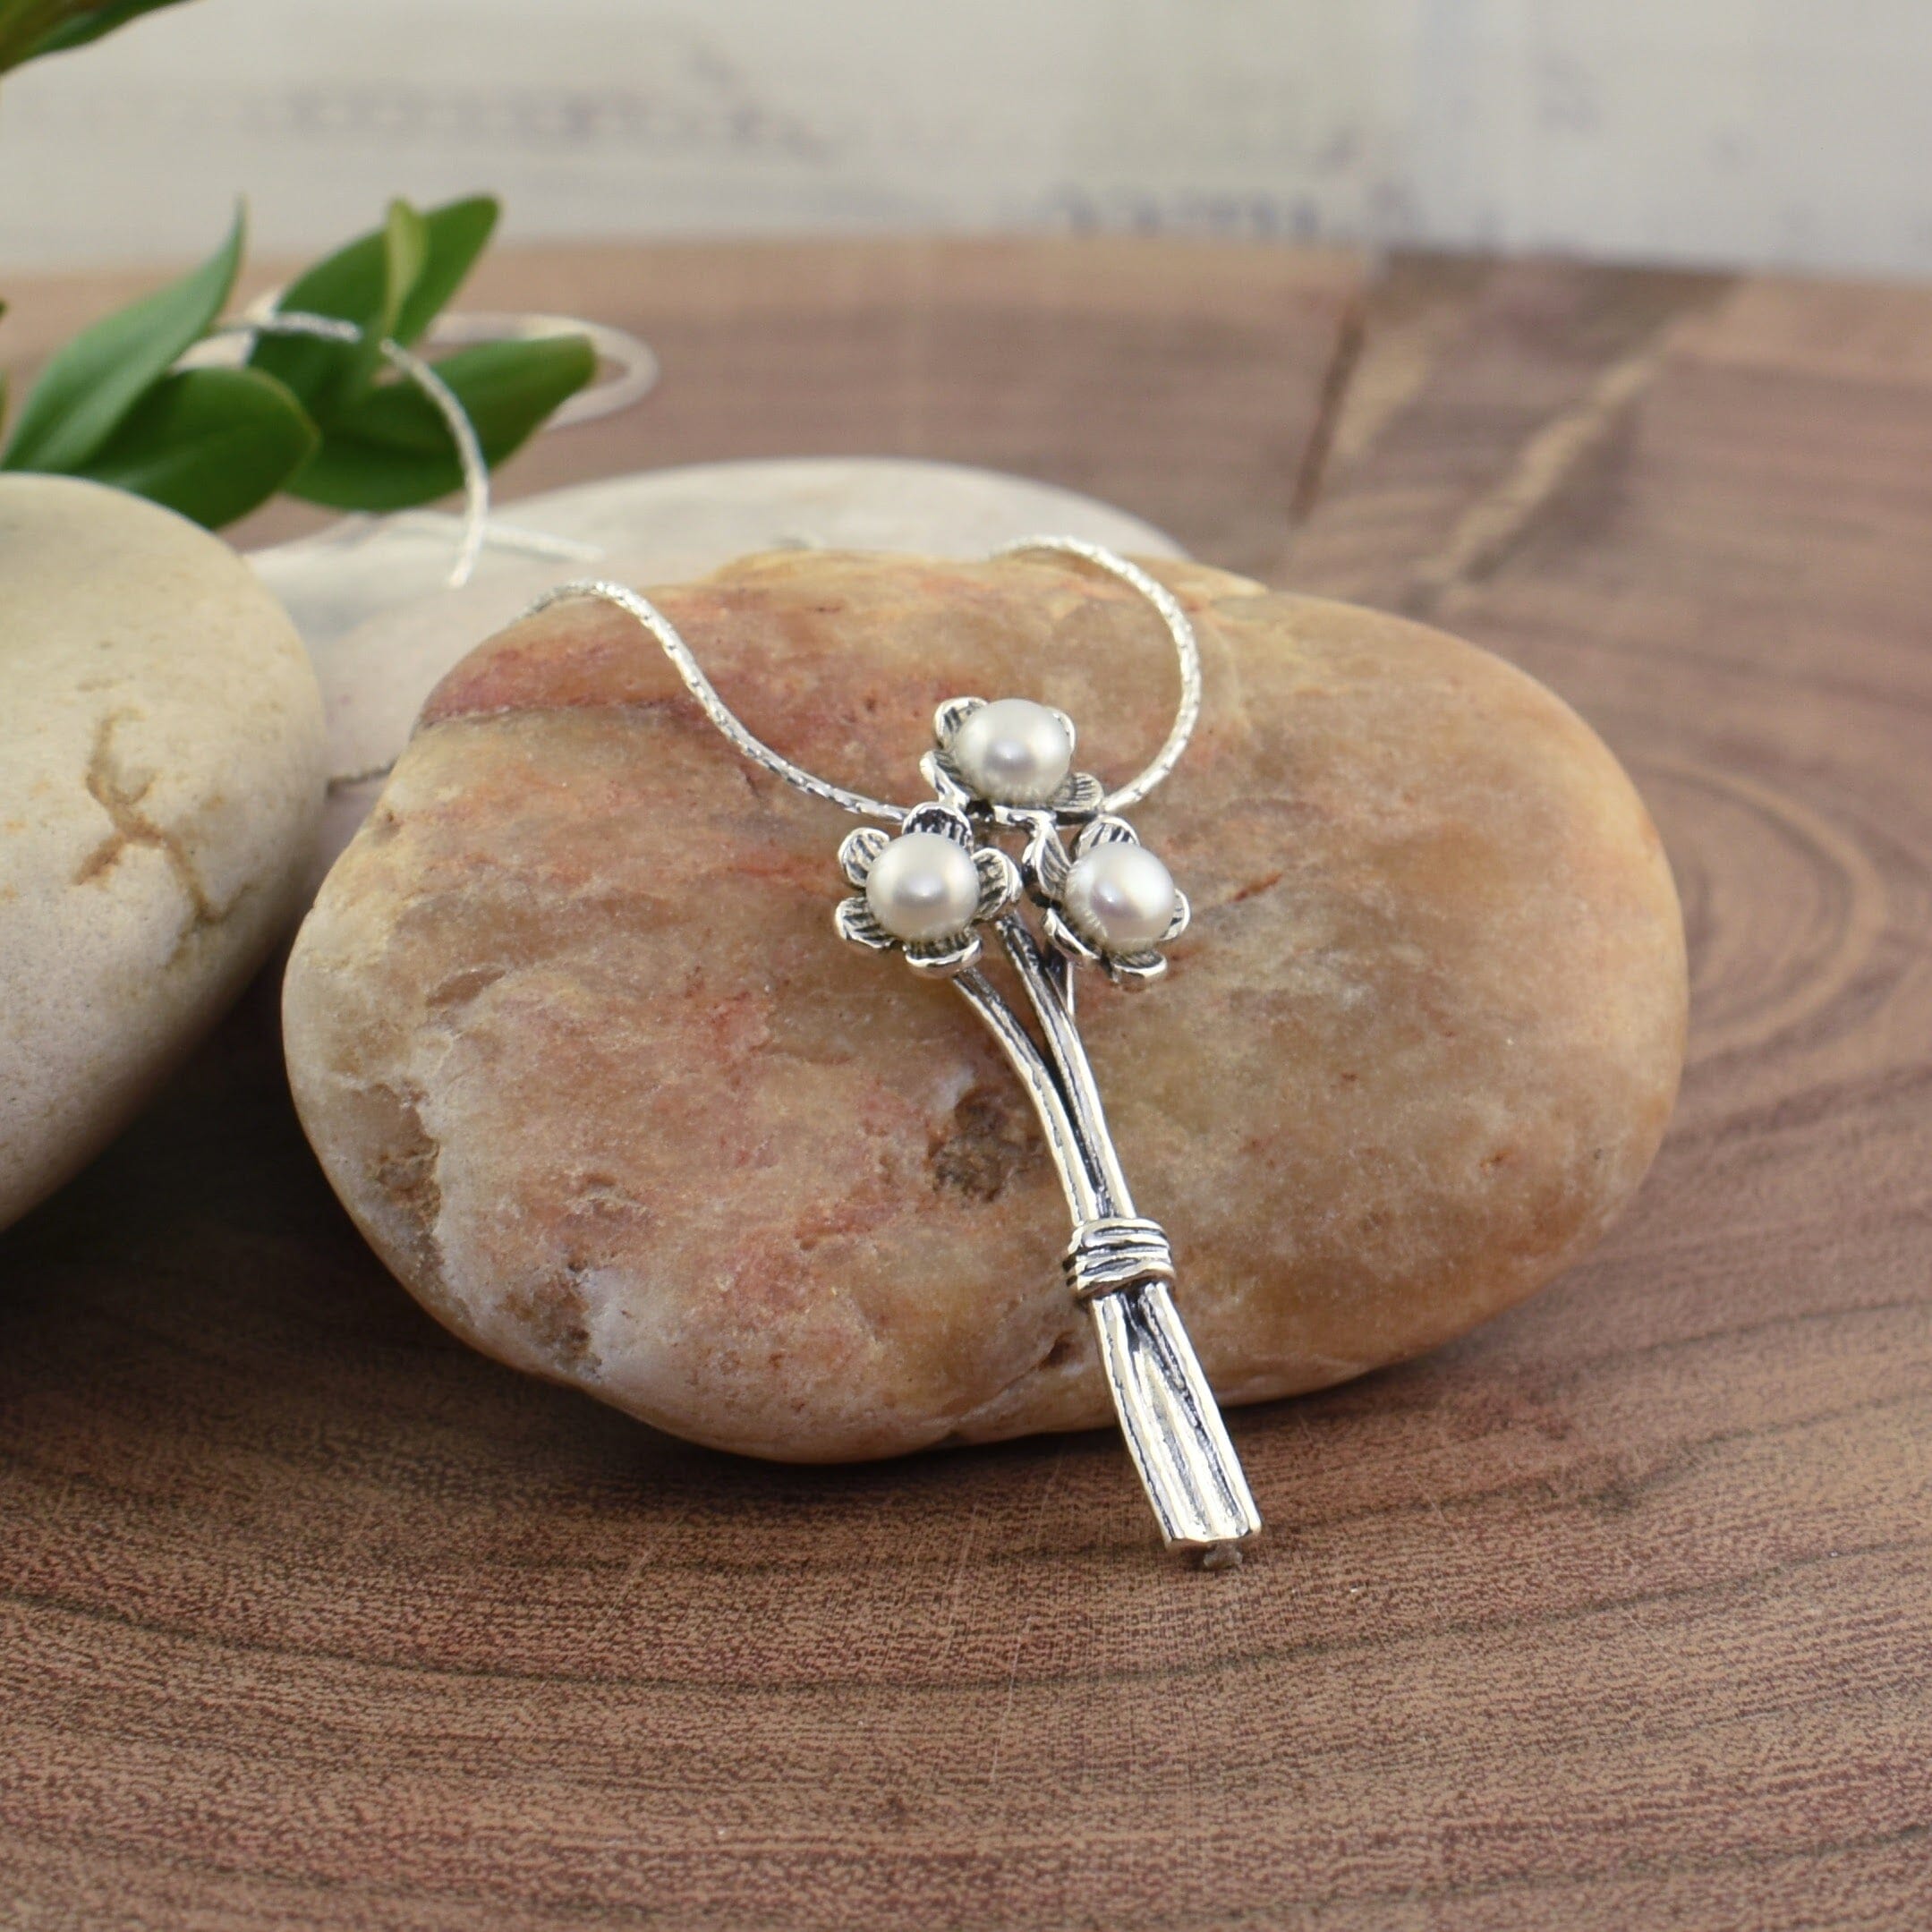 chunky sterling silver hand picked flower necklace featuring three freshwater pearls